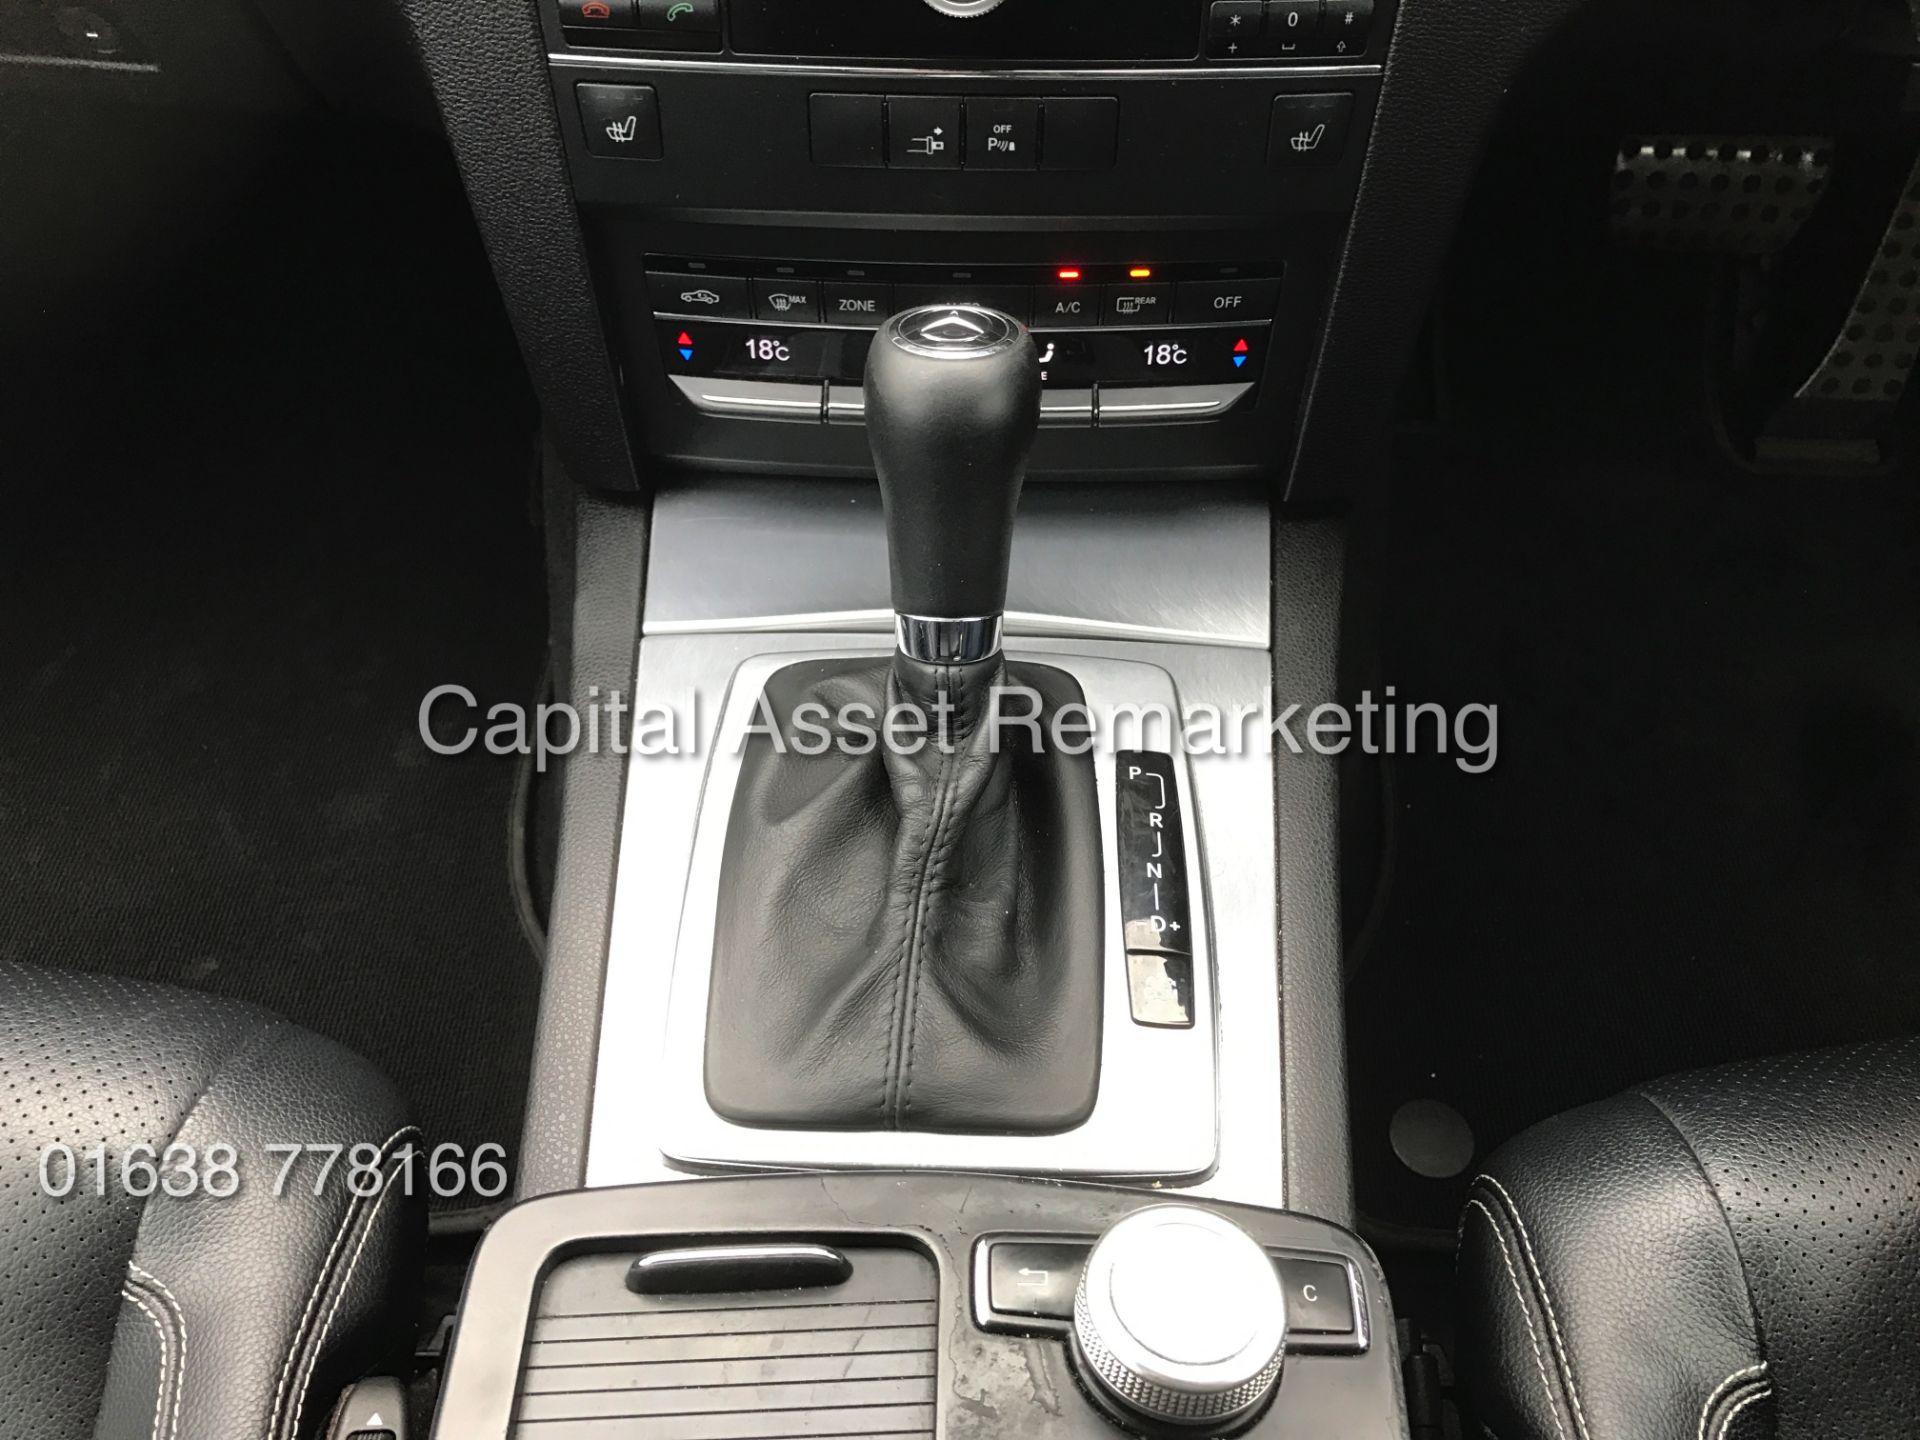 MERCEDES E350CDI 7G TRONIC "AMG SPORT" COUPE (10 REG) SAT NAV - LEATHER - AMG PACK - FULLY LOADED ! - Image 19 of 25